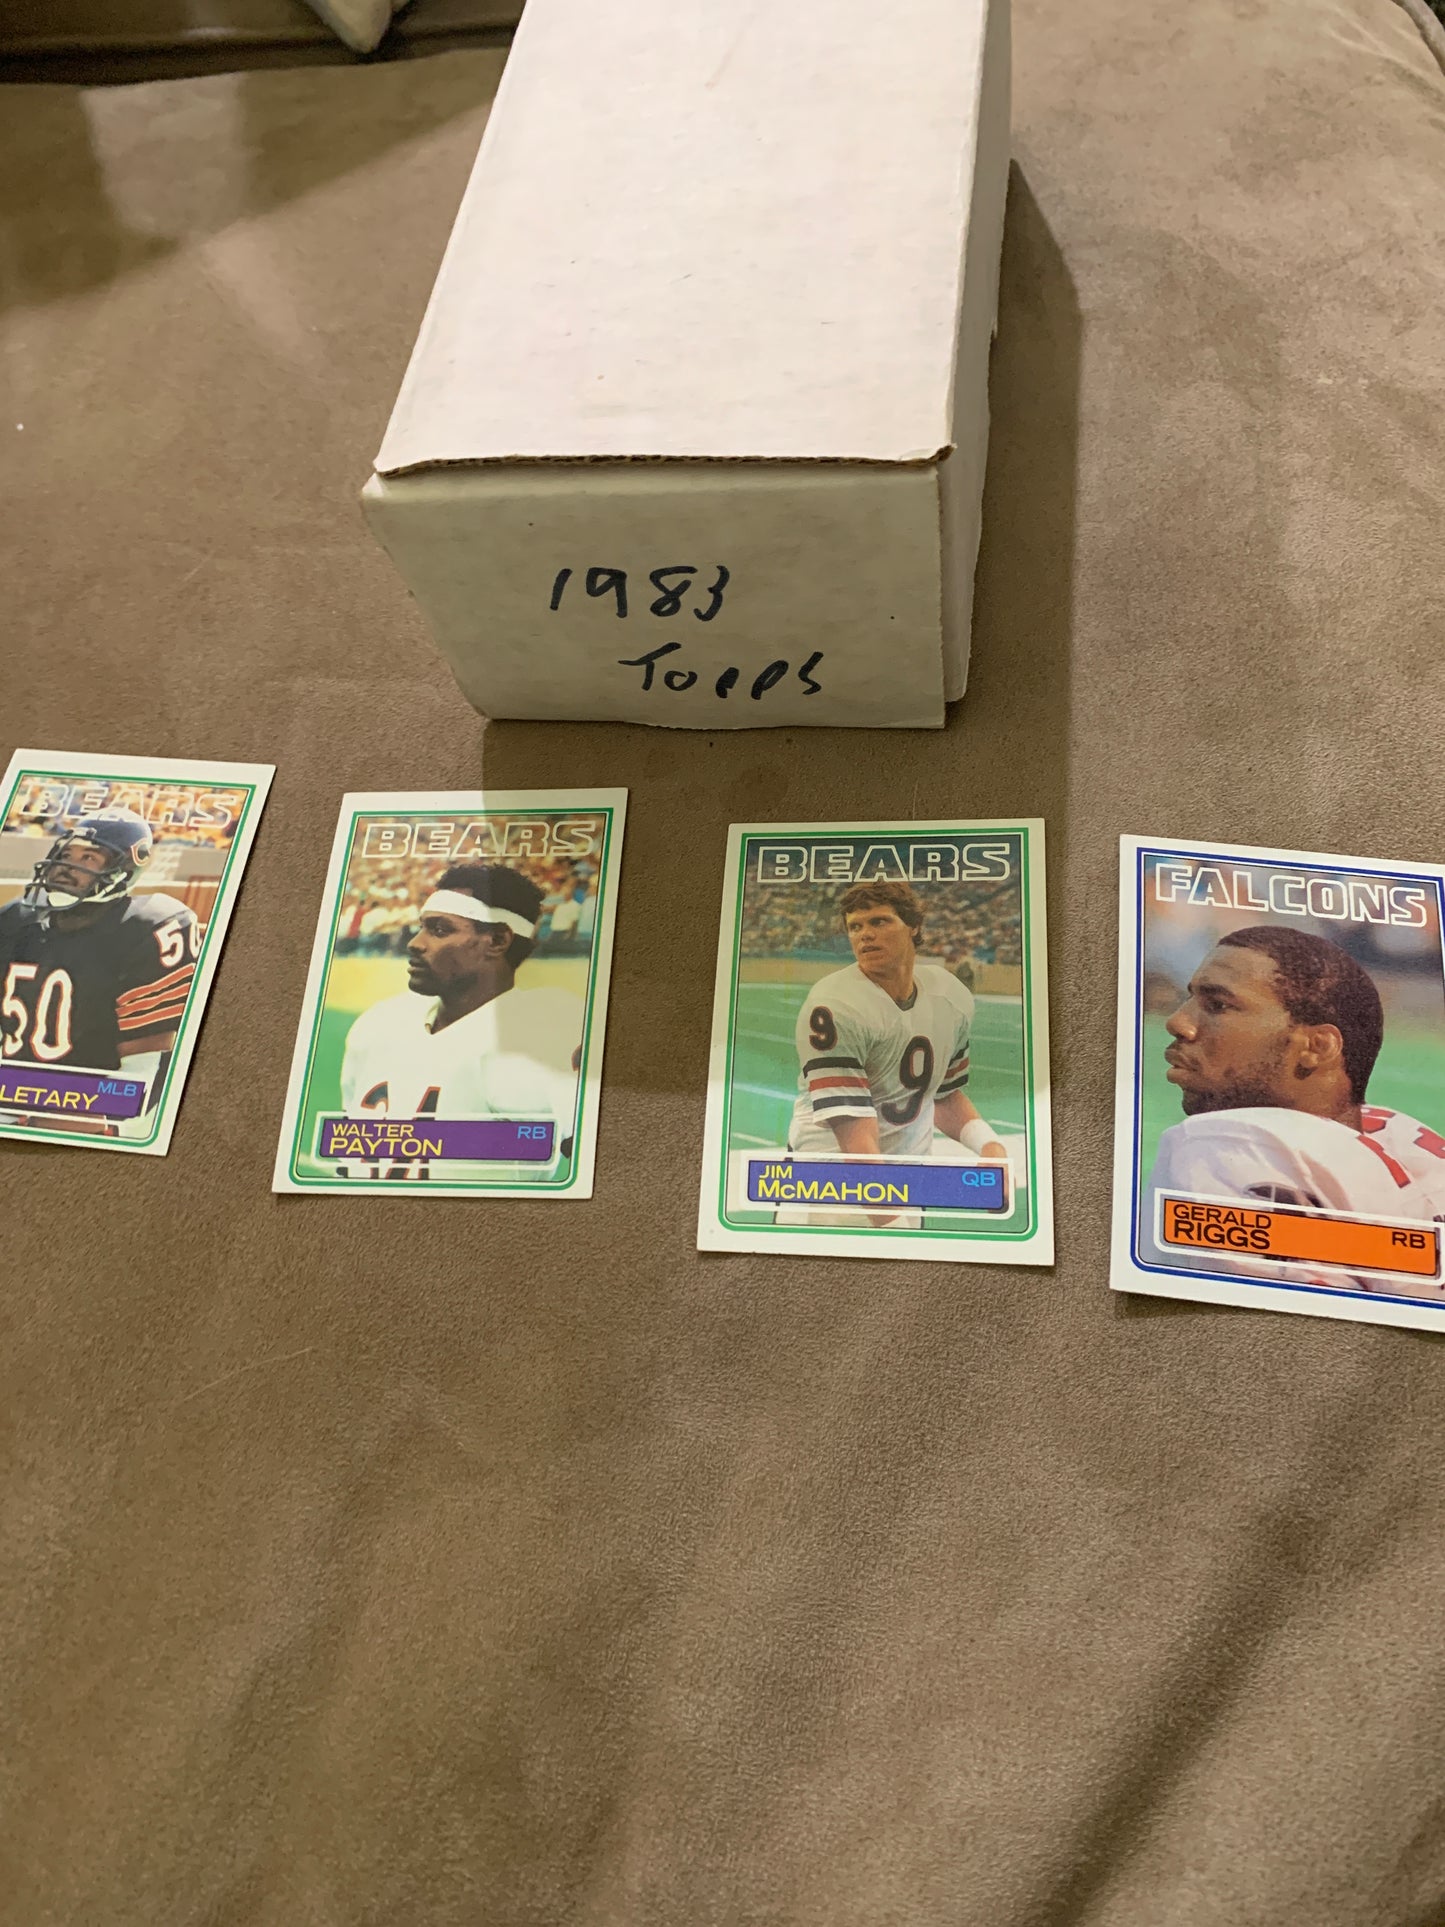 1983 Topps Football complete Hand Collected Singletary RC, McMahon RC, Riggs RC